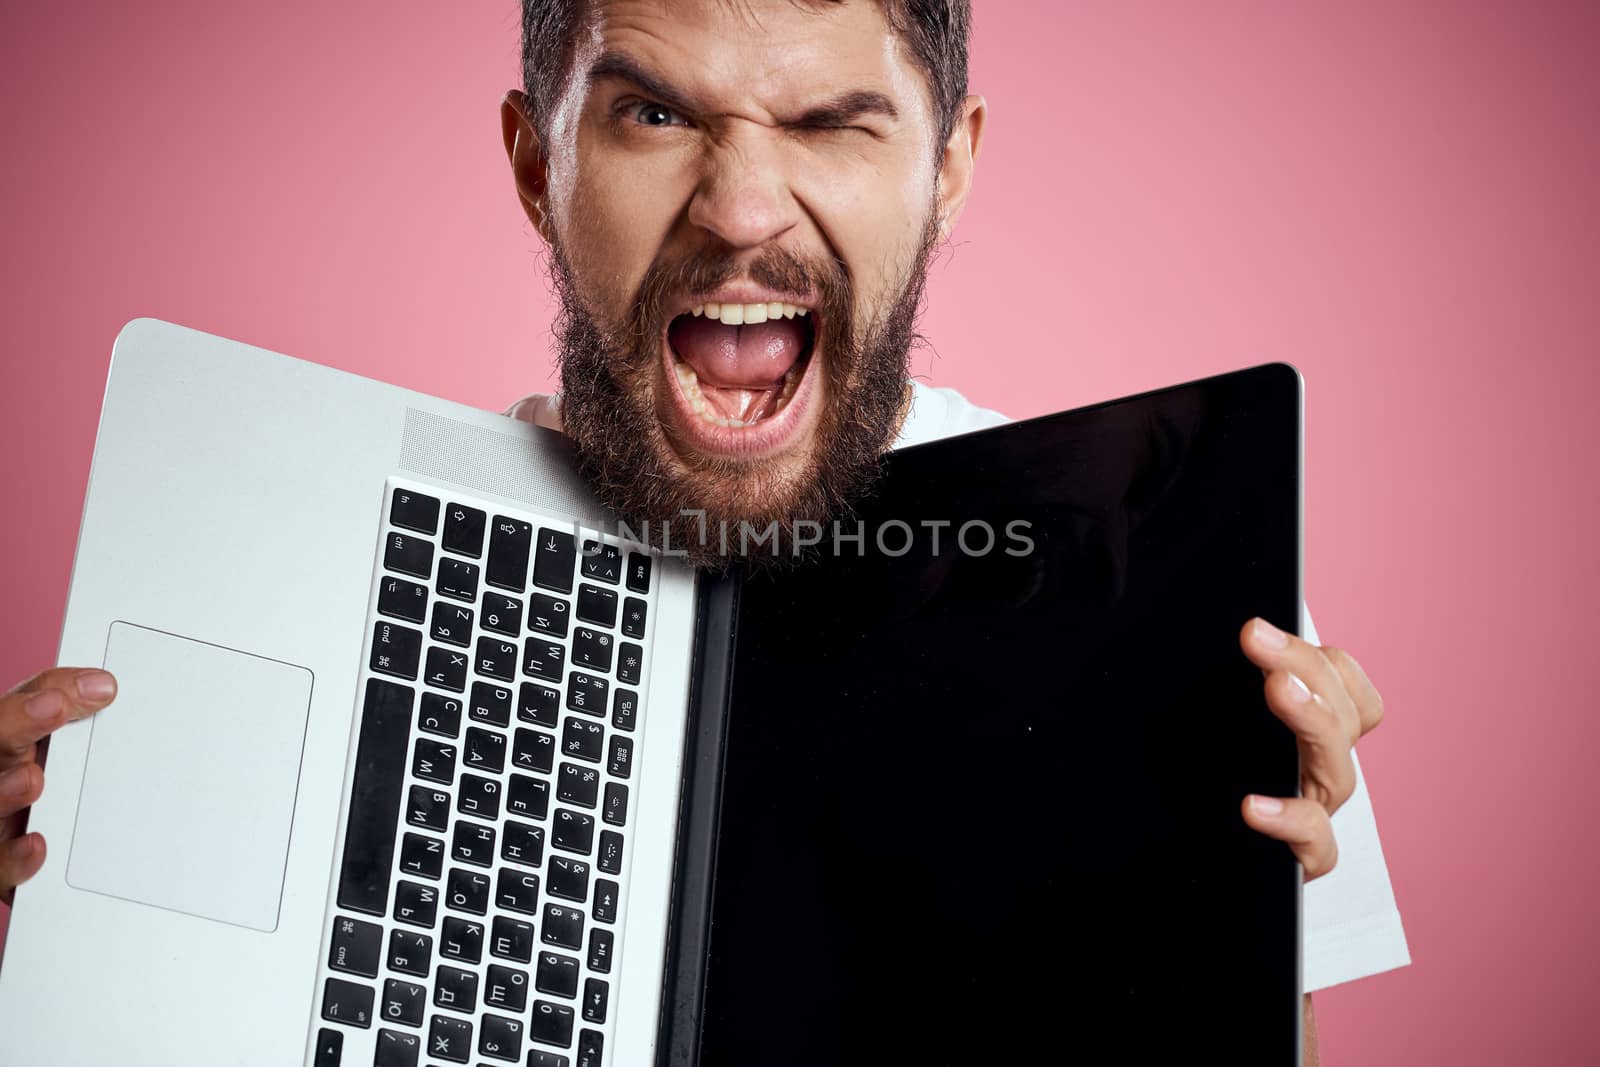 A man with an open laptop on a pink background white t-shirt gestures with his hands cropped view new technology keyboard monitor. High quality photo